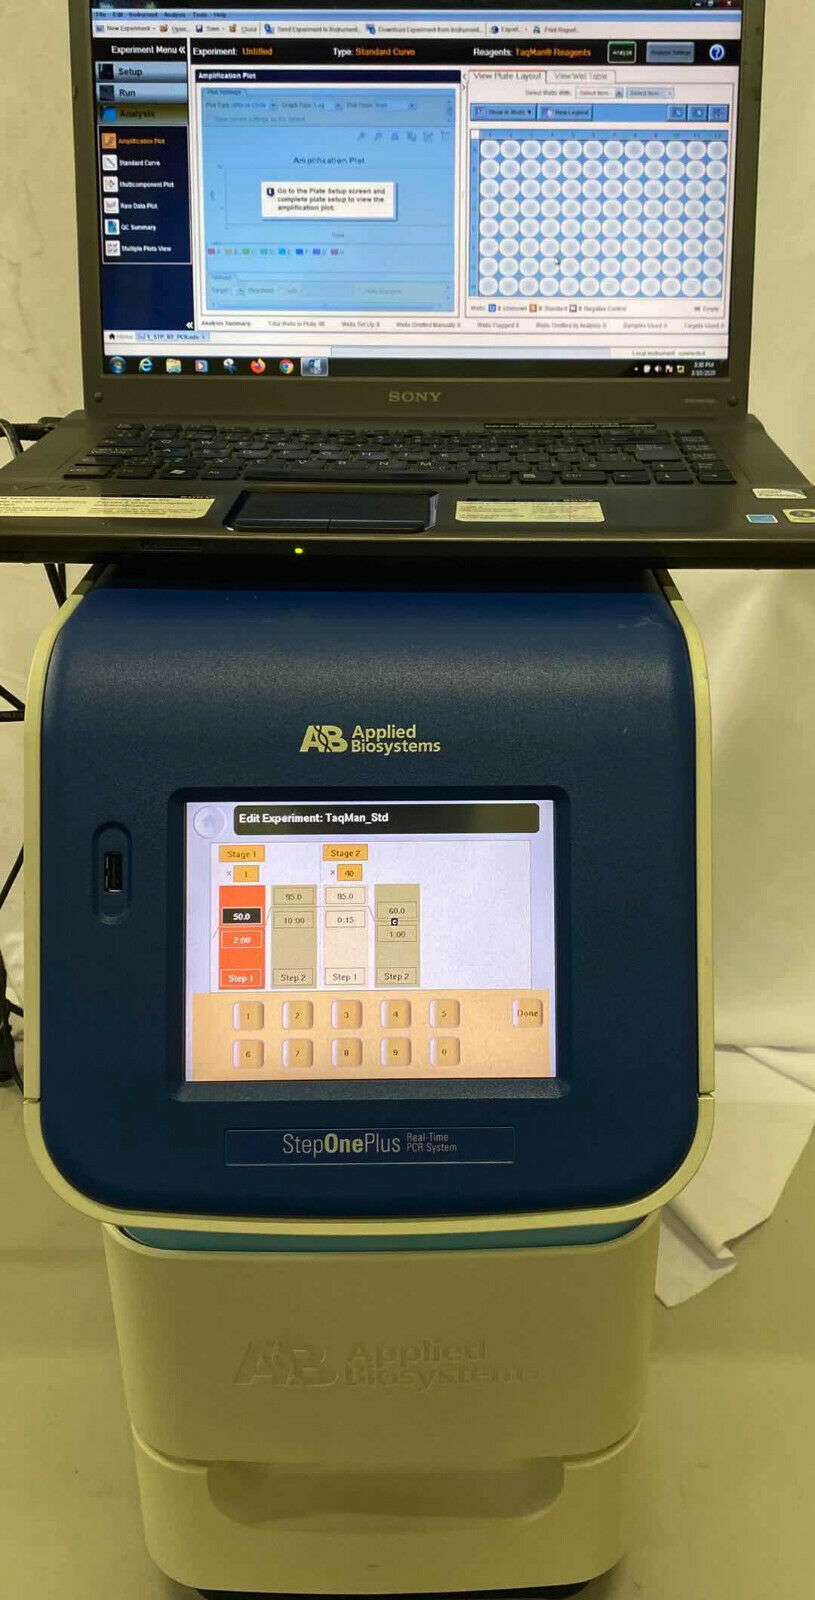 Applied Biosystems ABI PCR StepOnePlus Real-Time PCR System